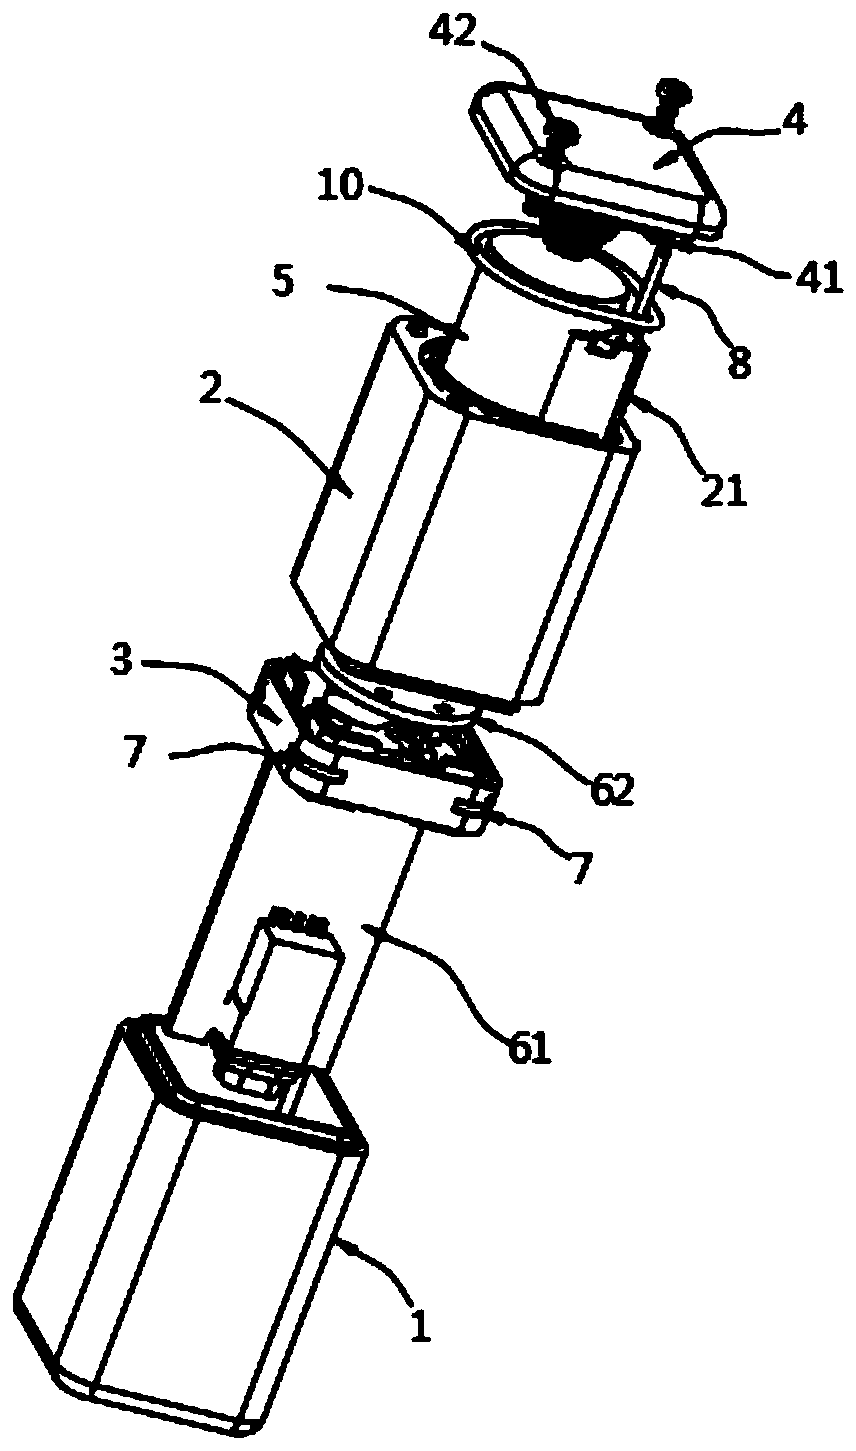 Mounting structure of detecting electrodes and water detector